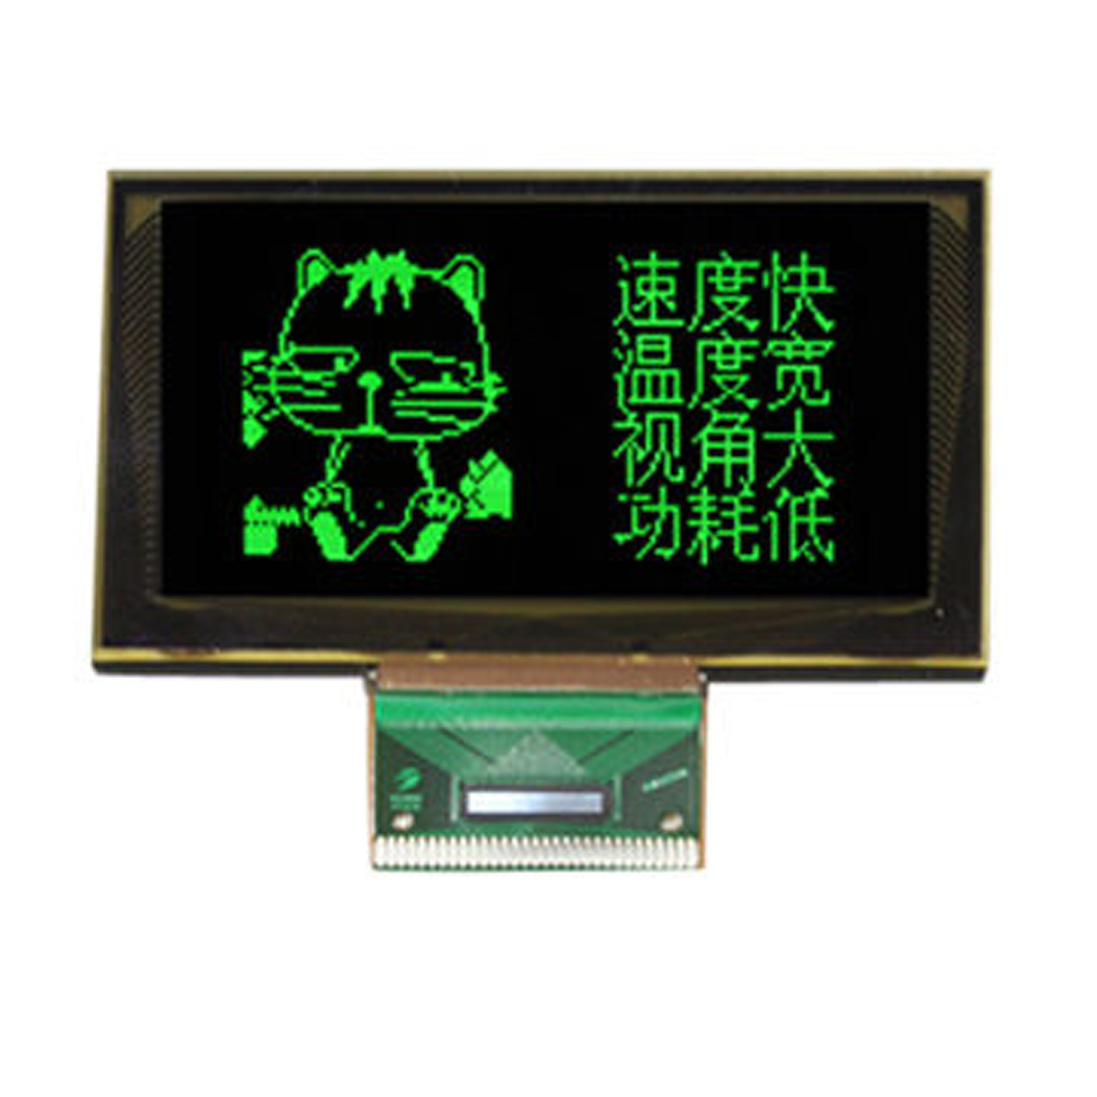 OLED LCD Display with 128X32 Resolution